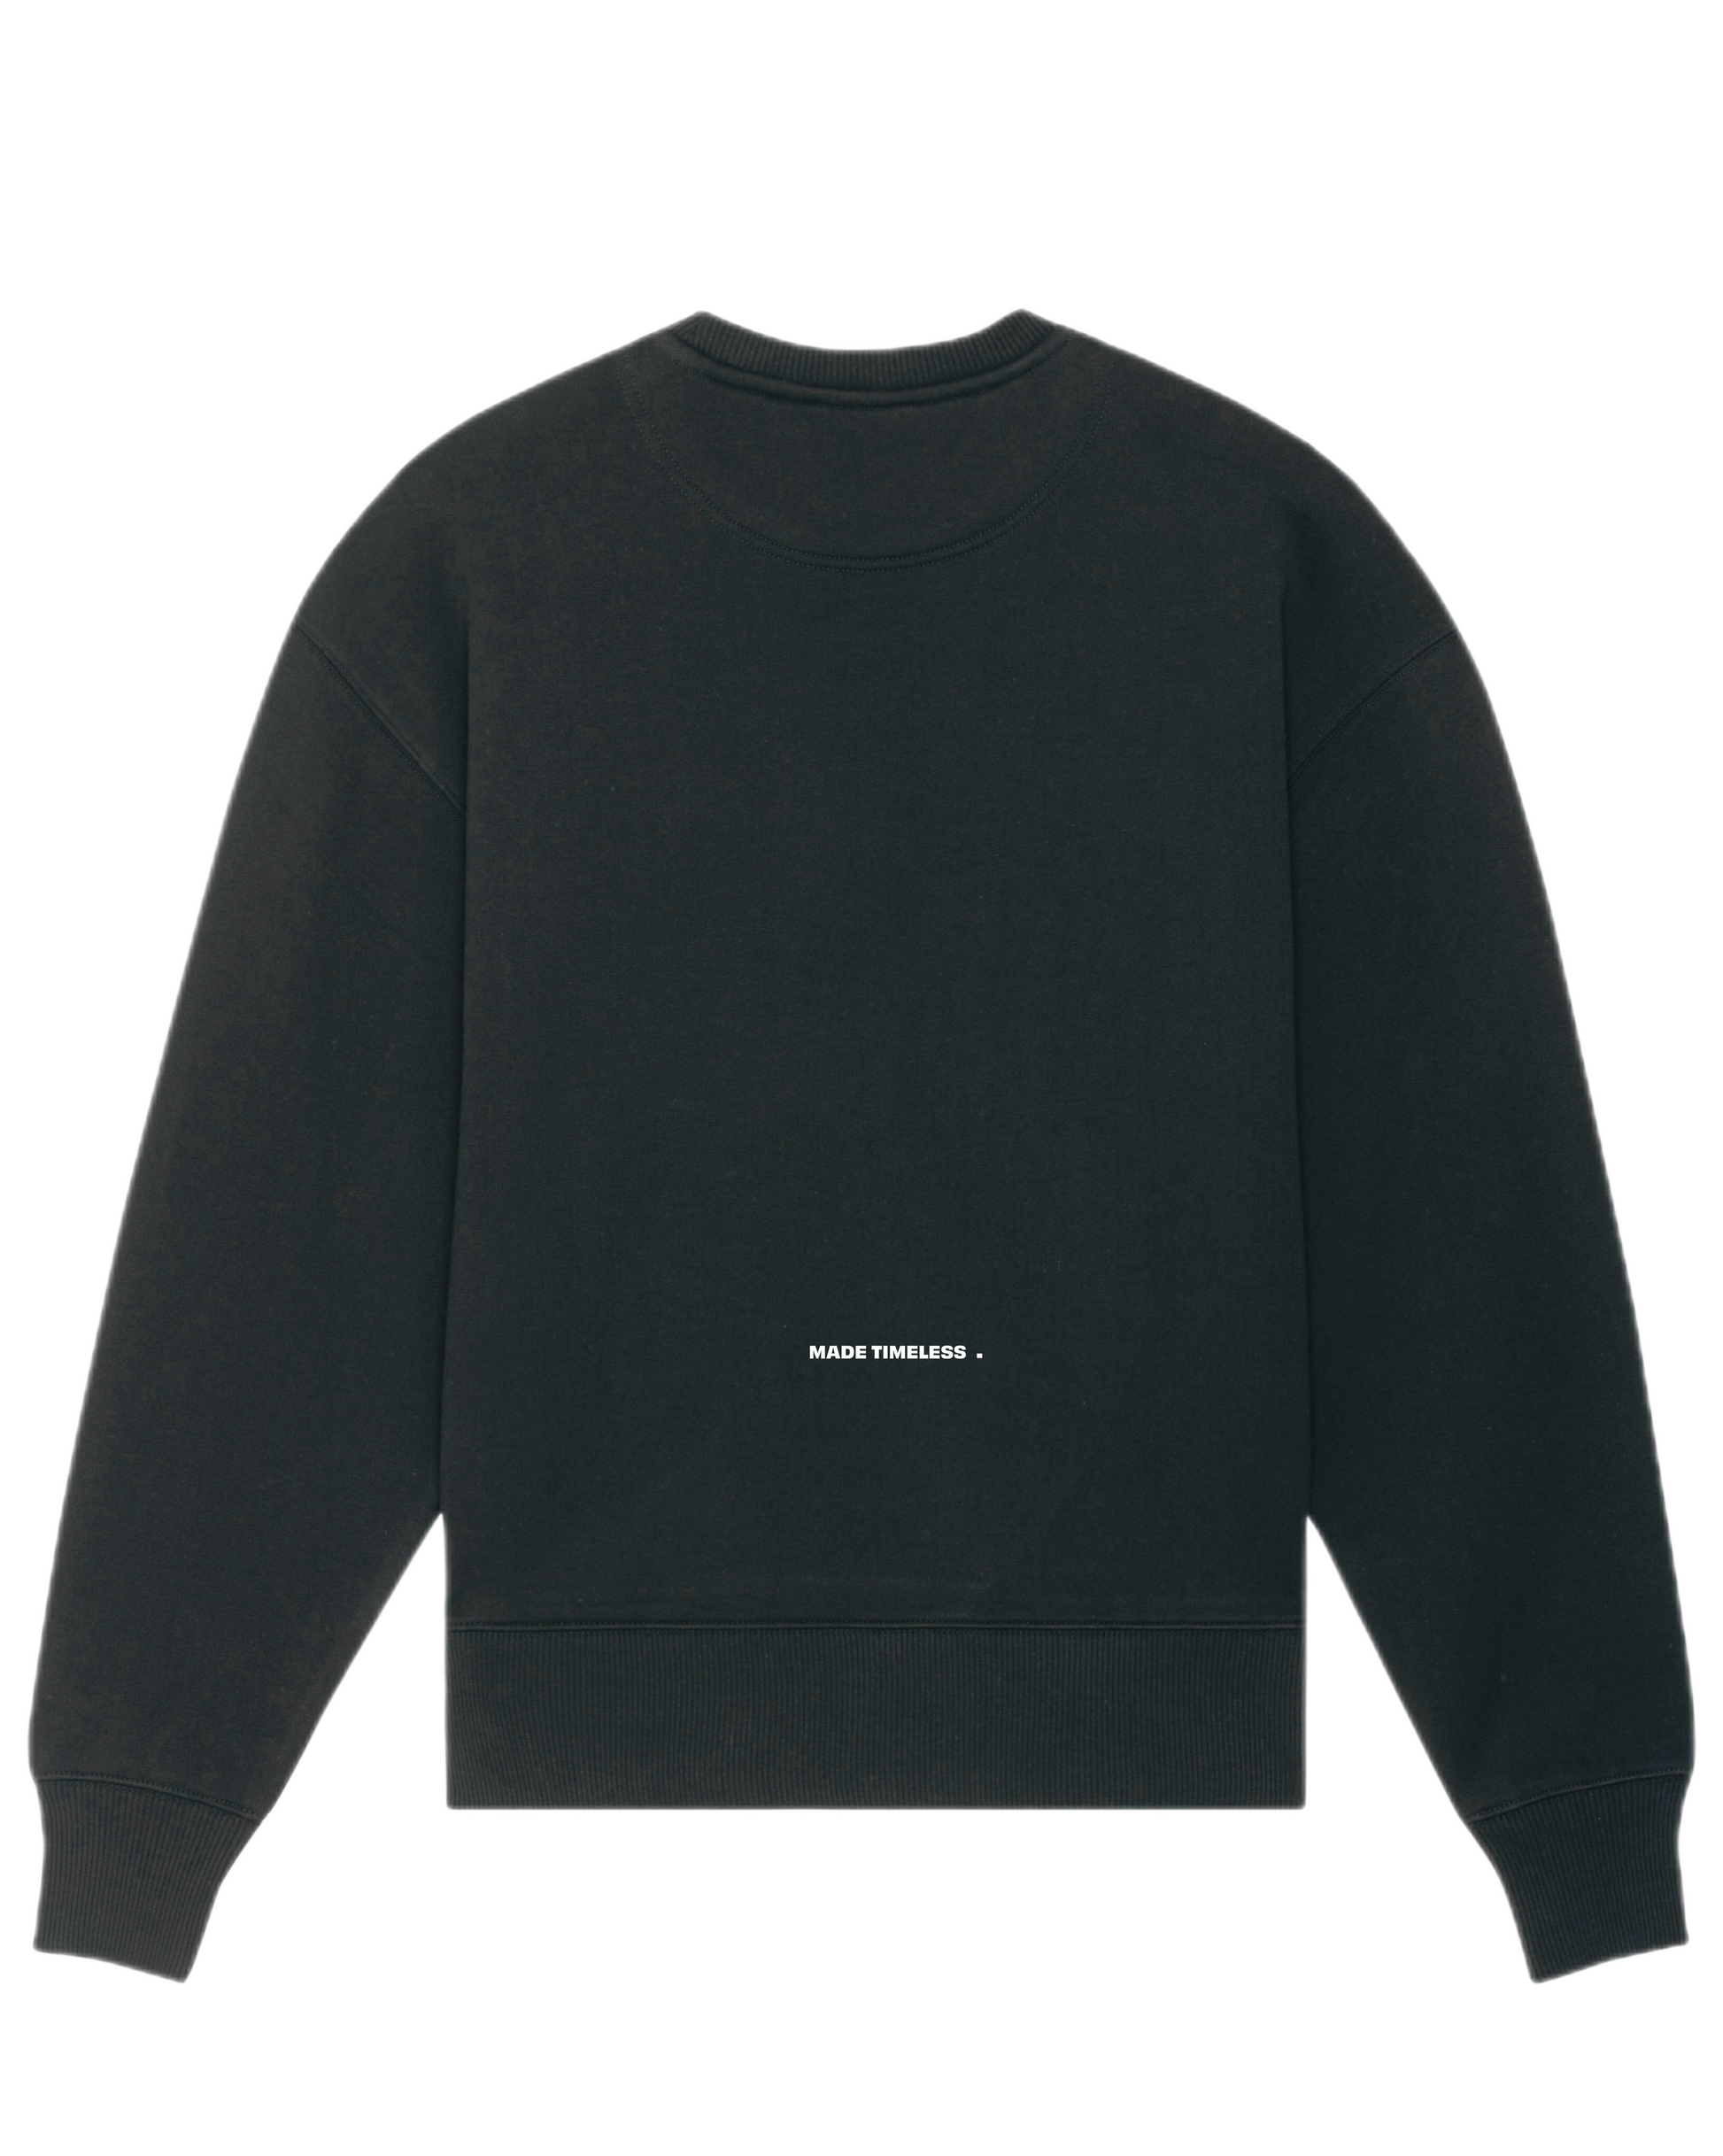 Back of the heavyweight more amoure crewneck in black with the text made timeless printed on the lower back